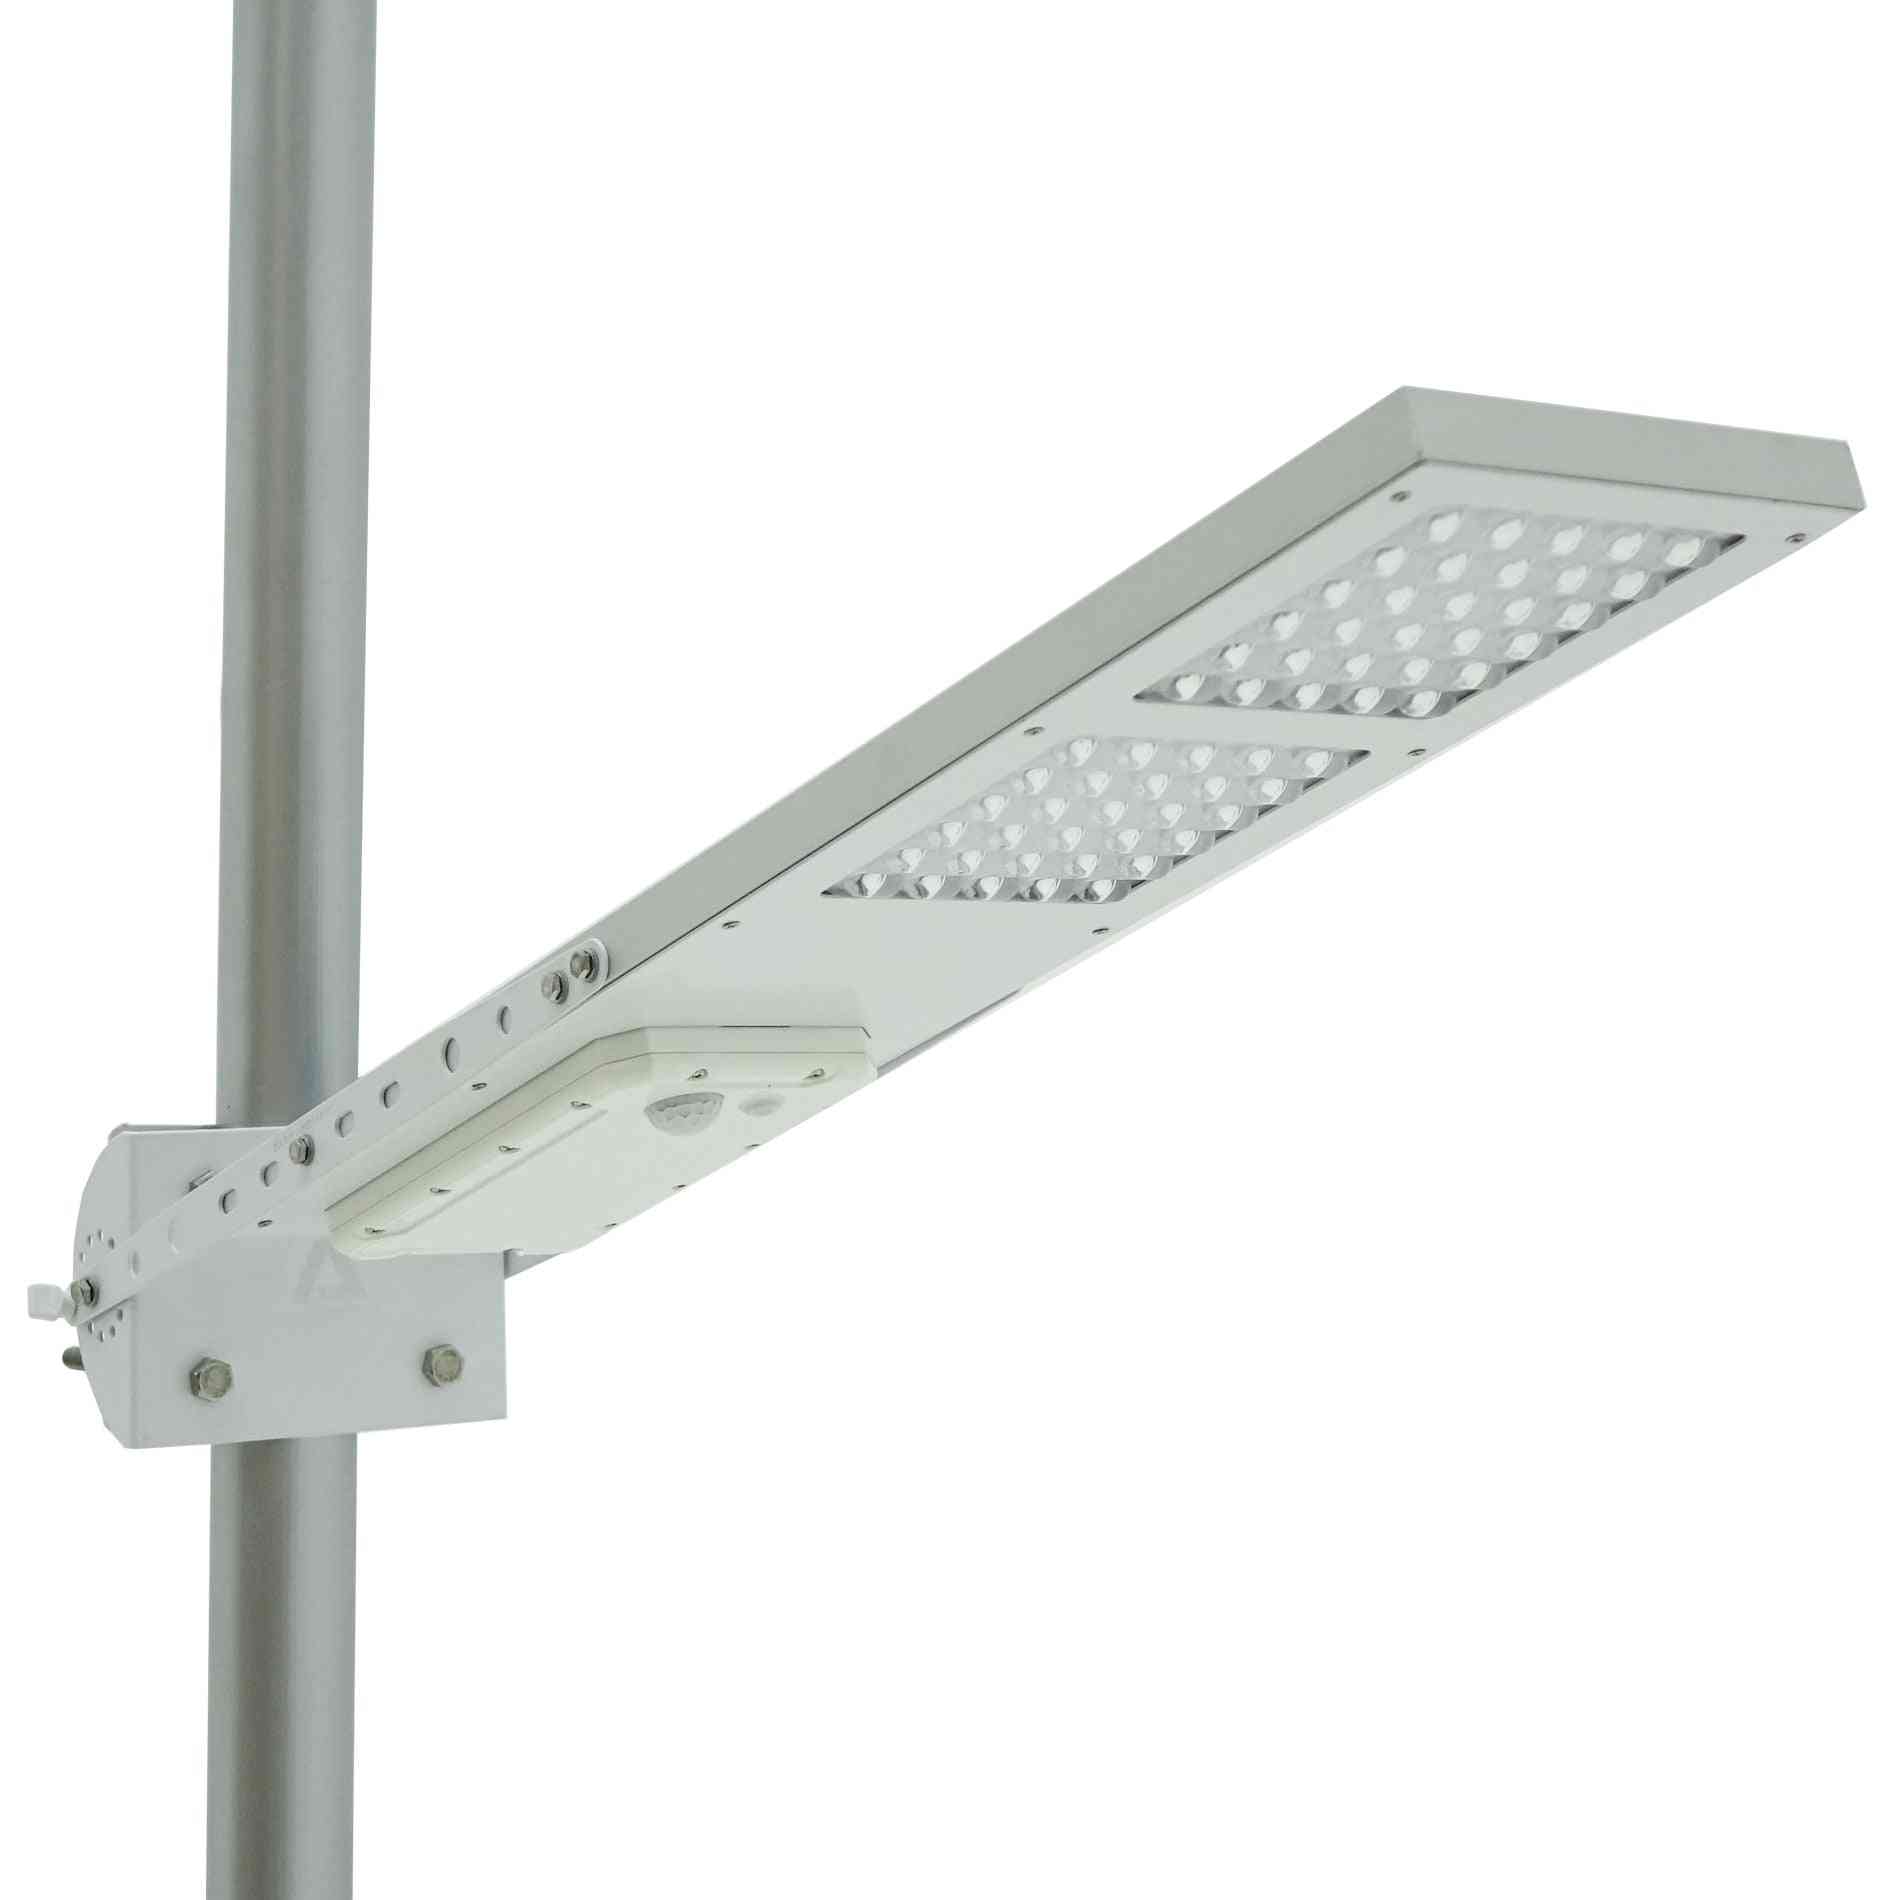 Solar Street Light Fixture With Built-in Lithium Battery, Mounting Bracket, Screws Nuts